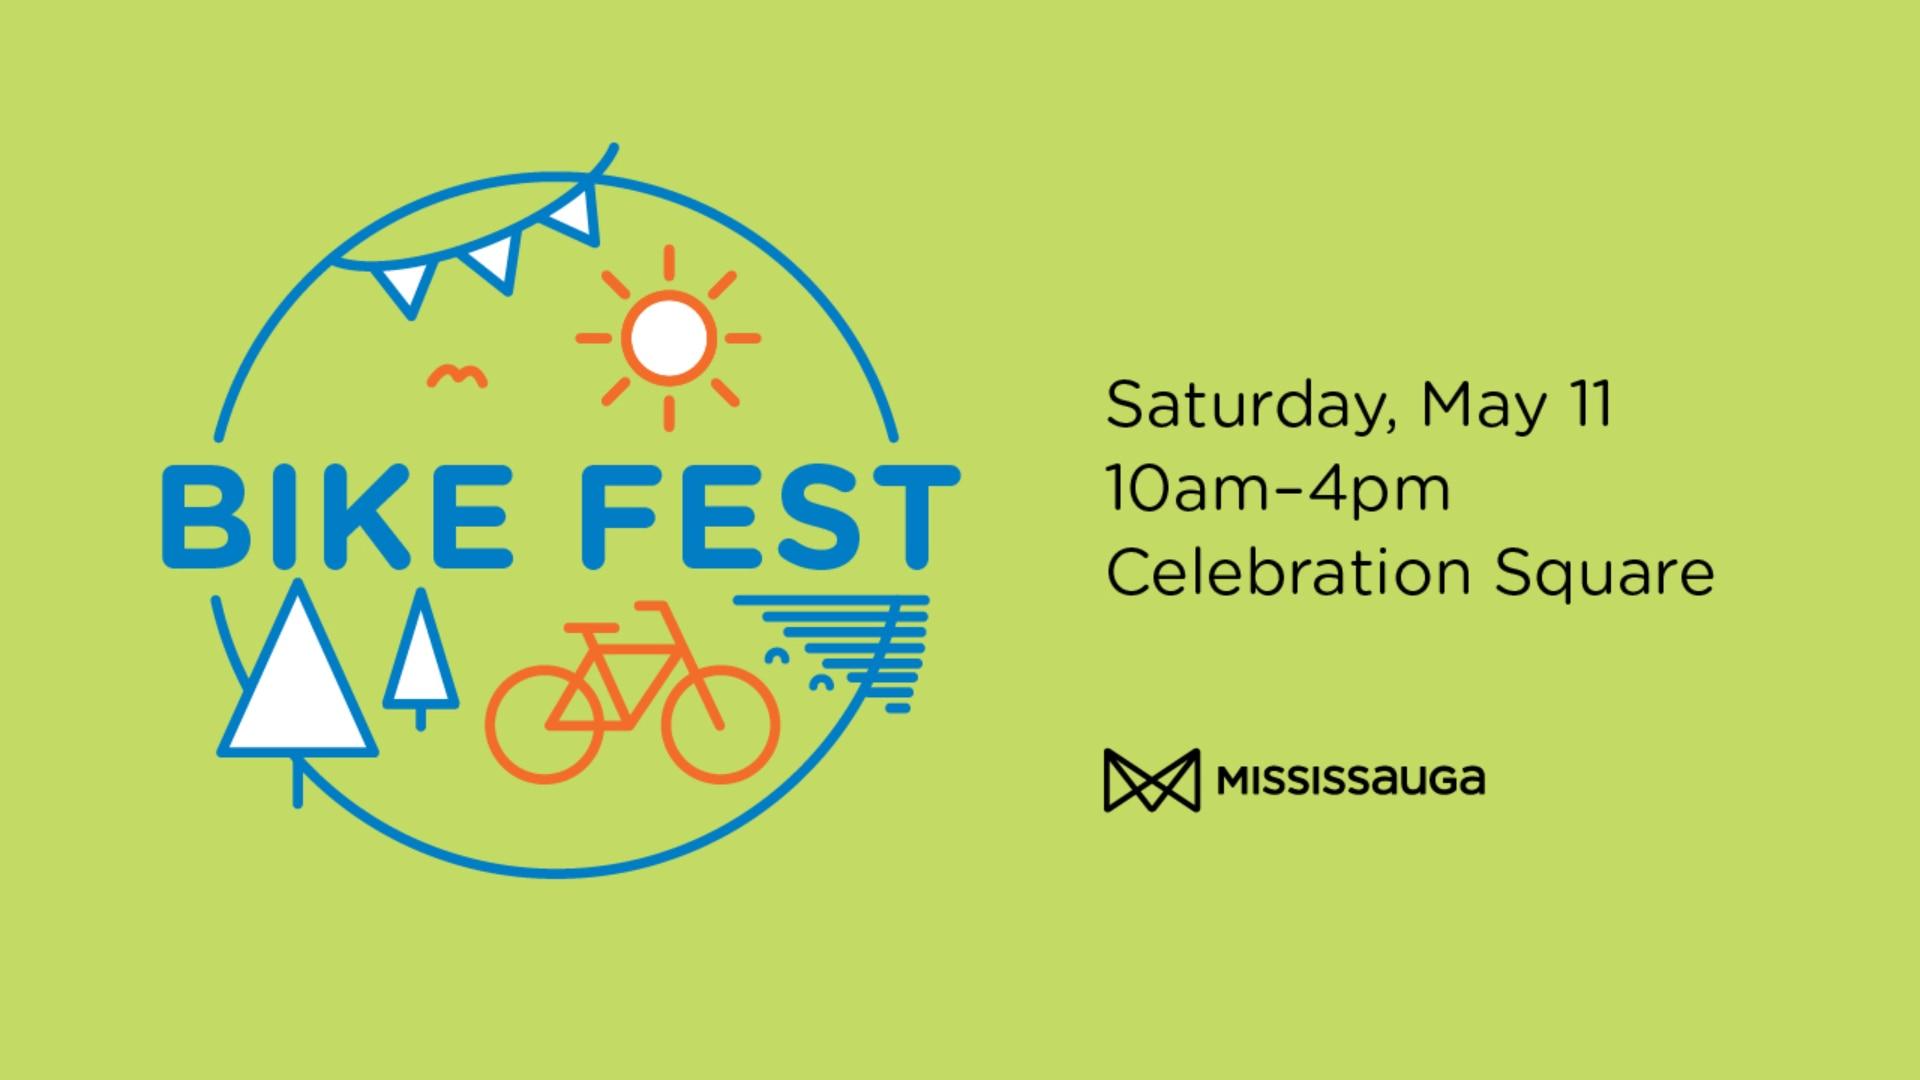 BikeFest launches this year’s cycling season in Mississauga